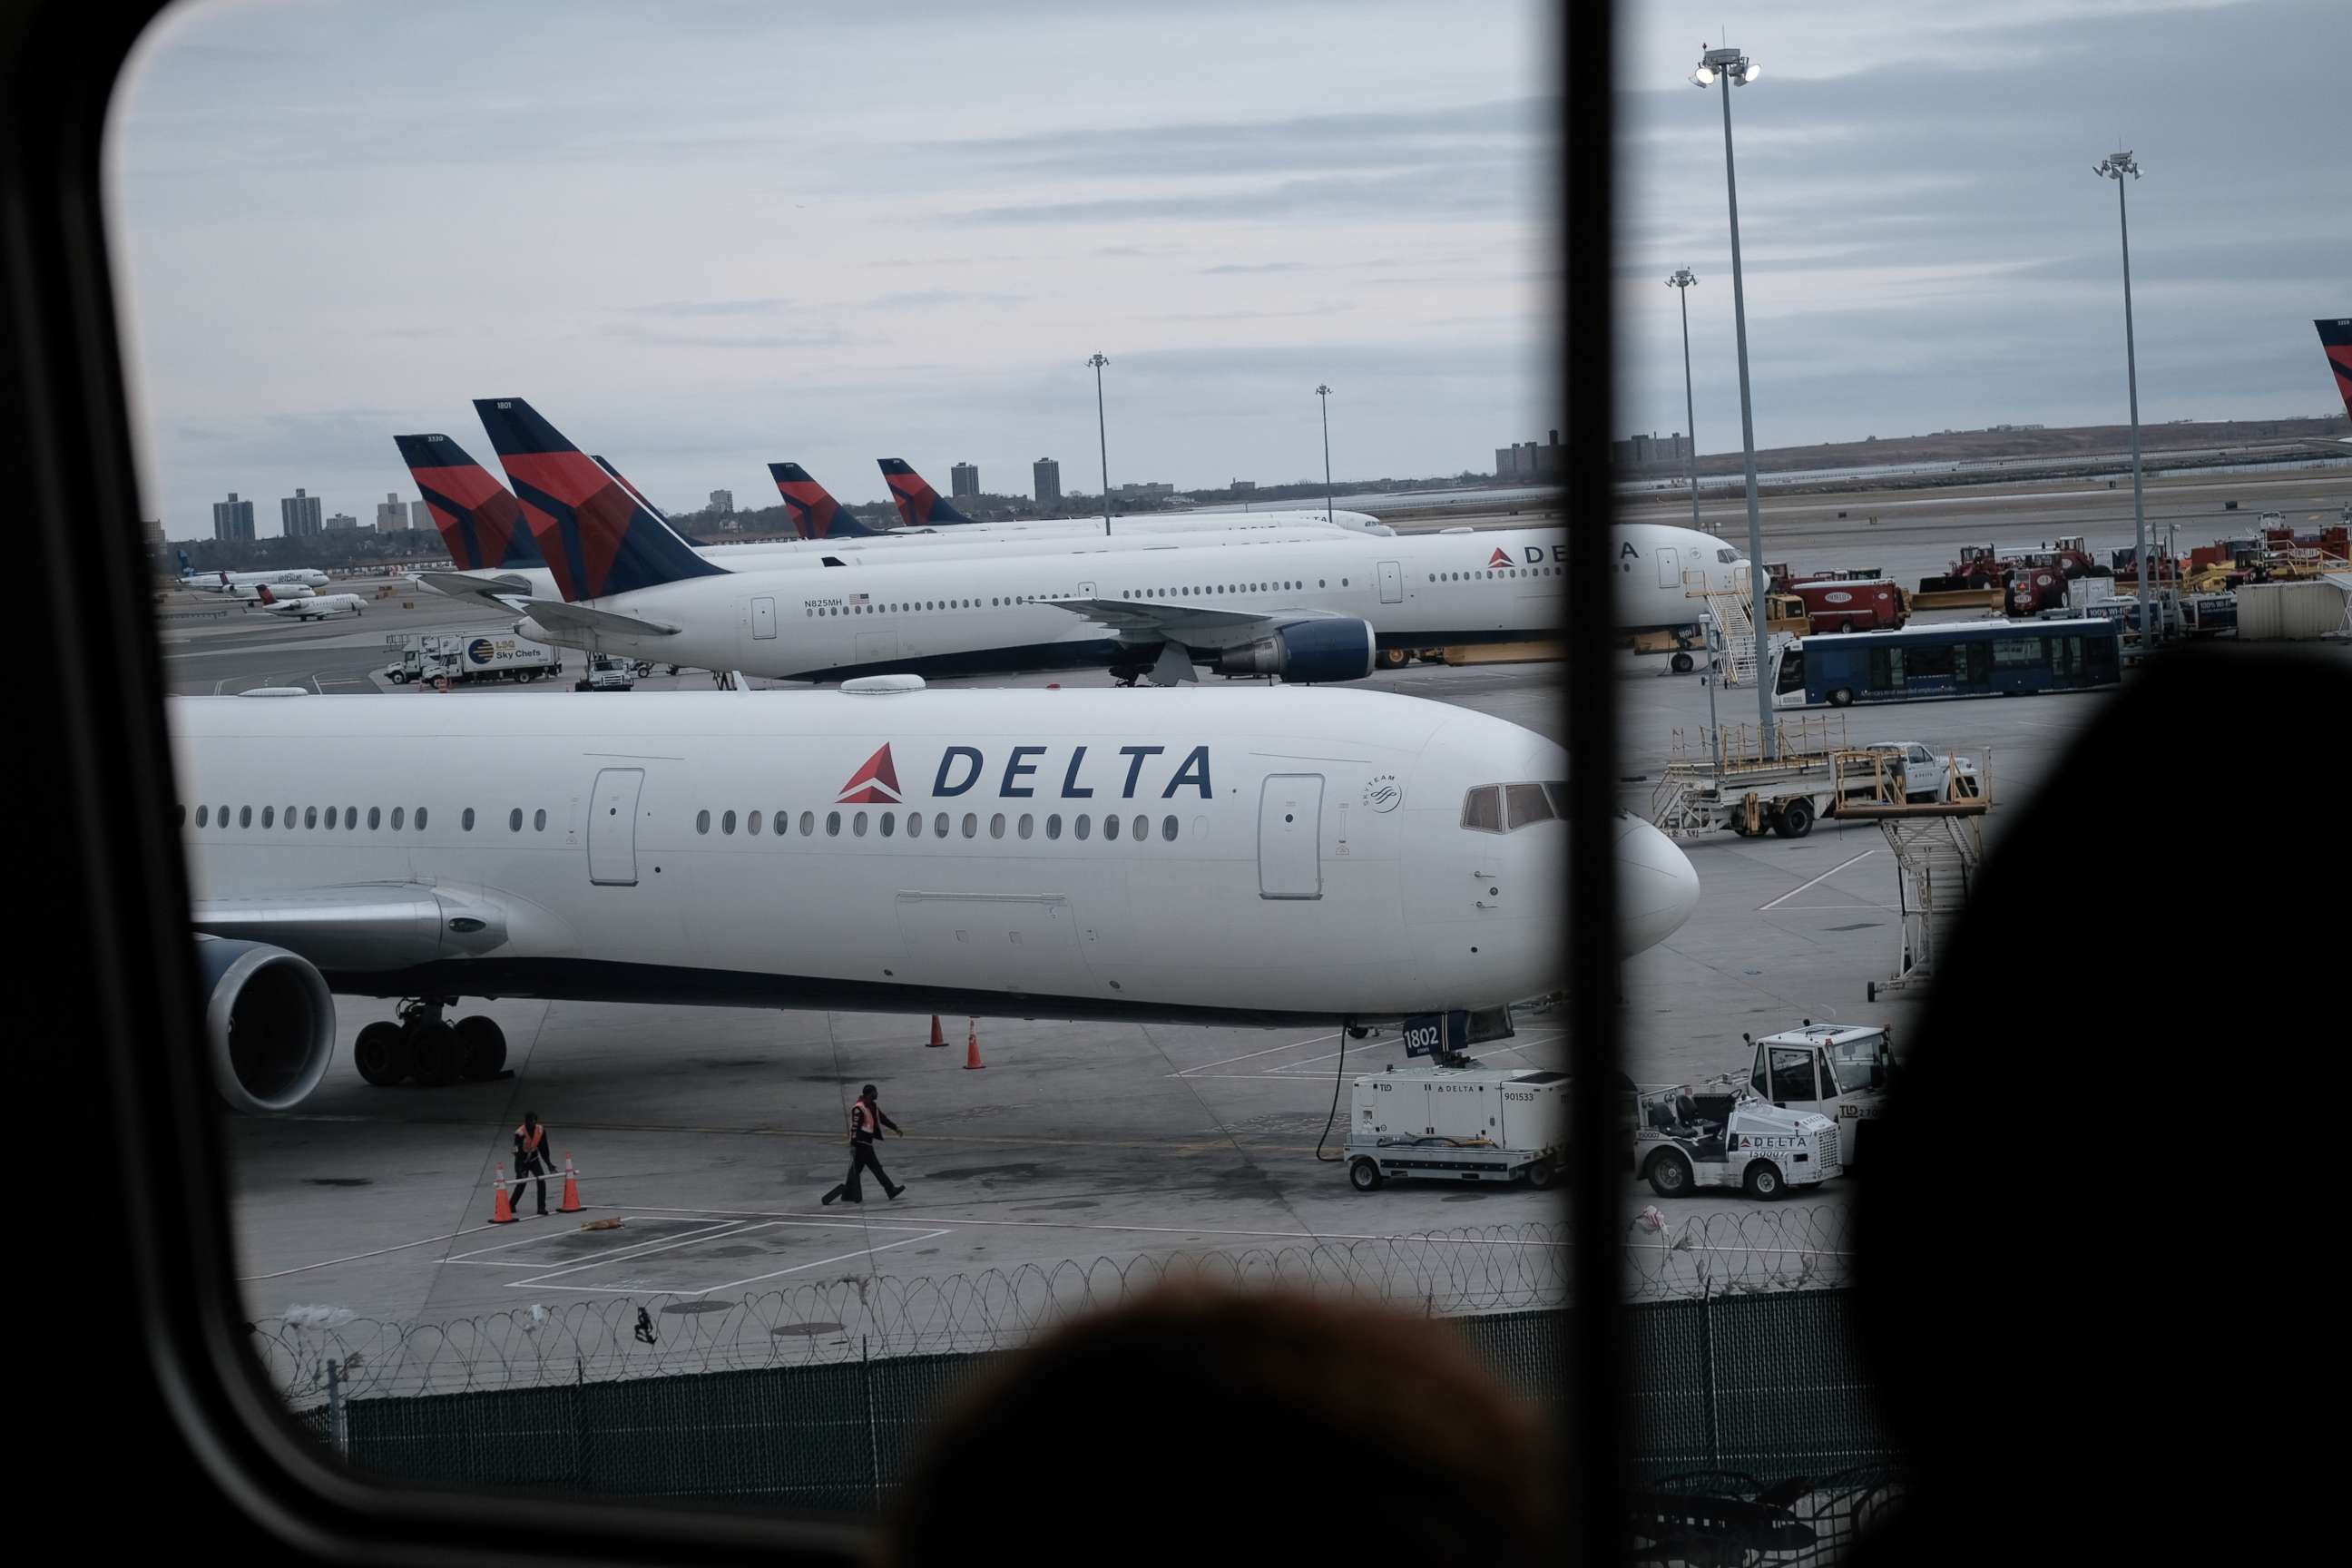 PHOTO: Delta airplanes sit on the tarmac at John F. Kennedy Airport on Jan. 31, 2020, in New York.